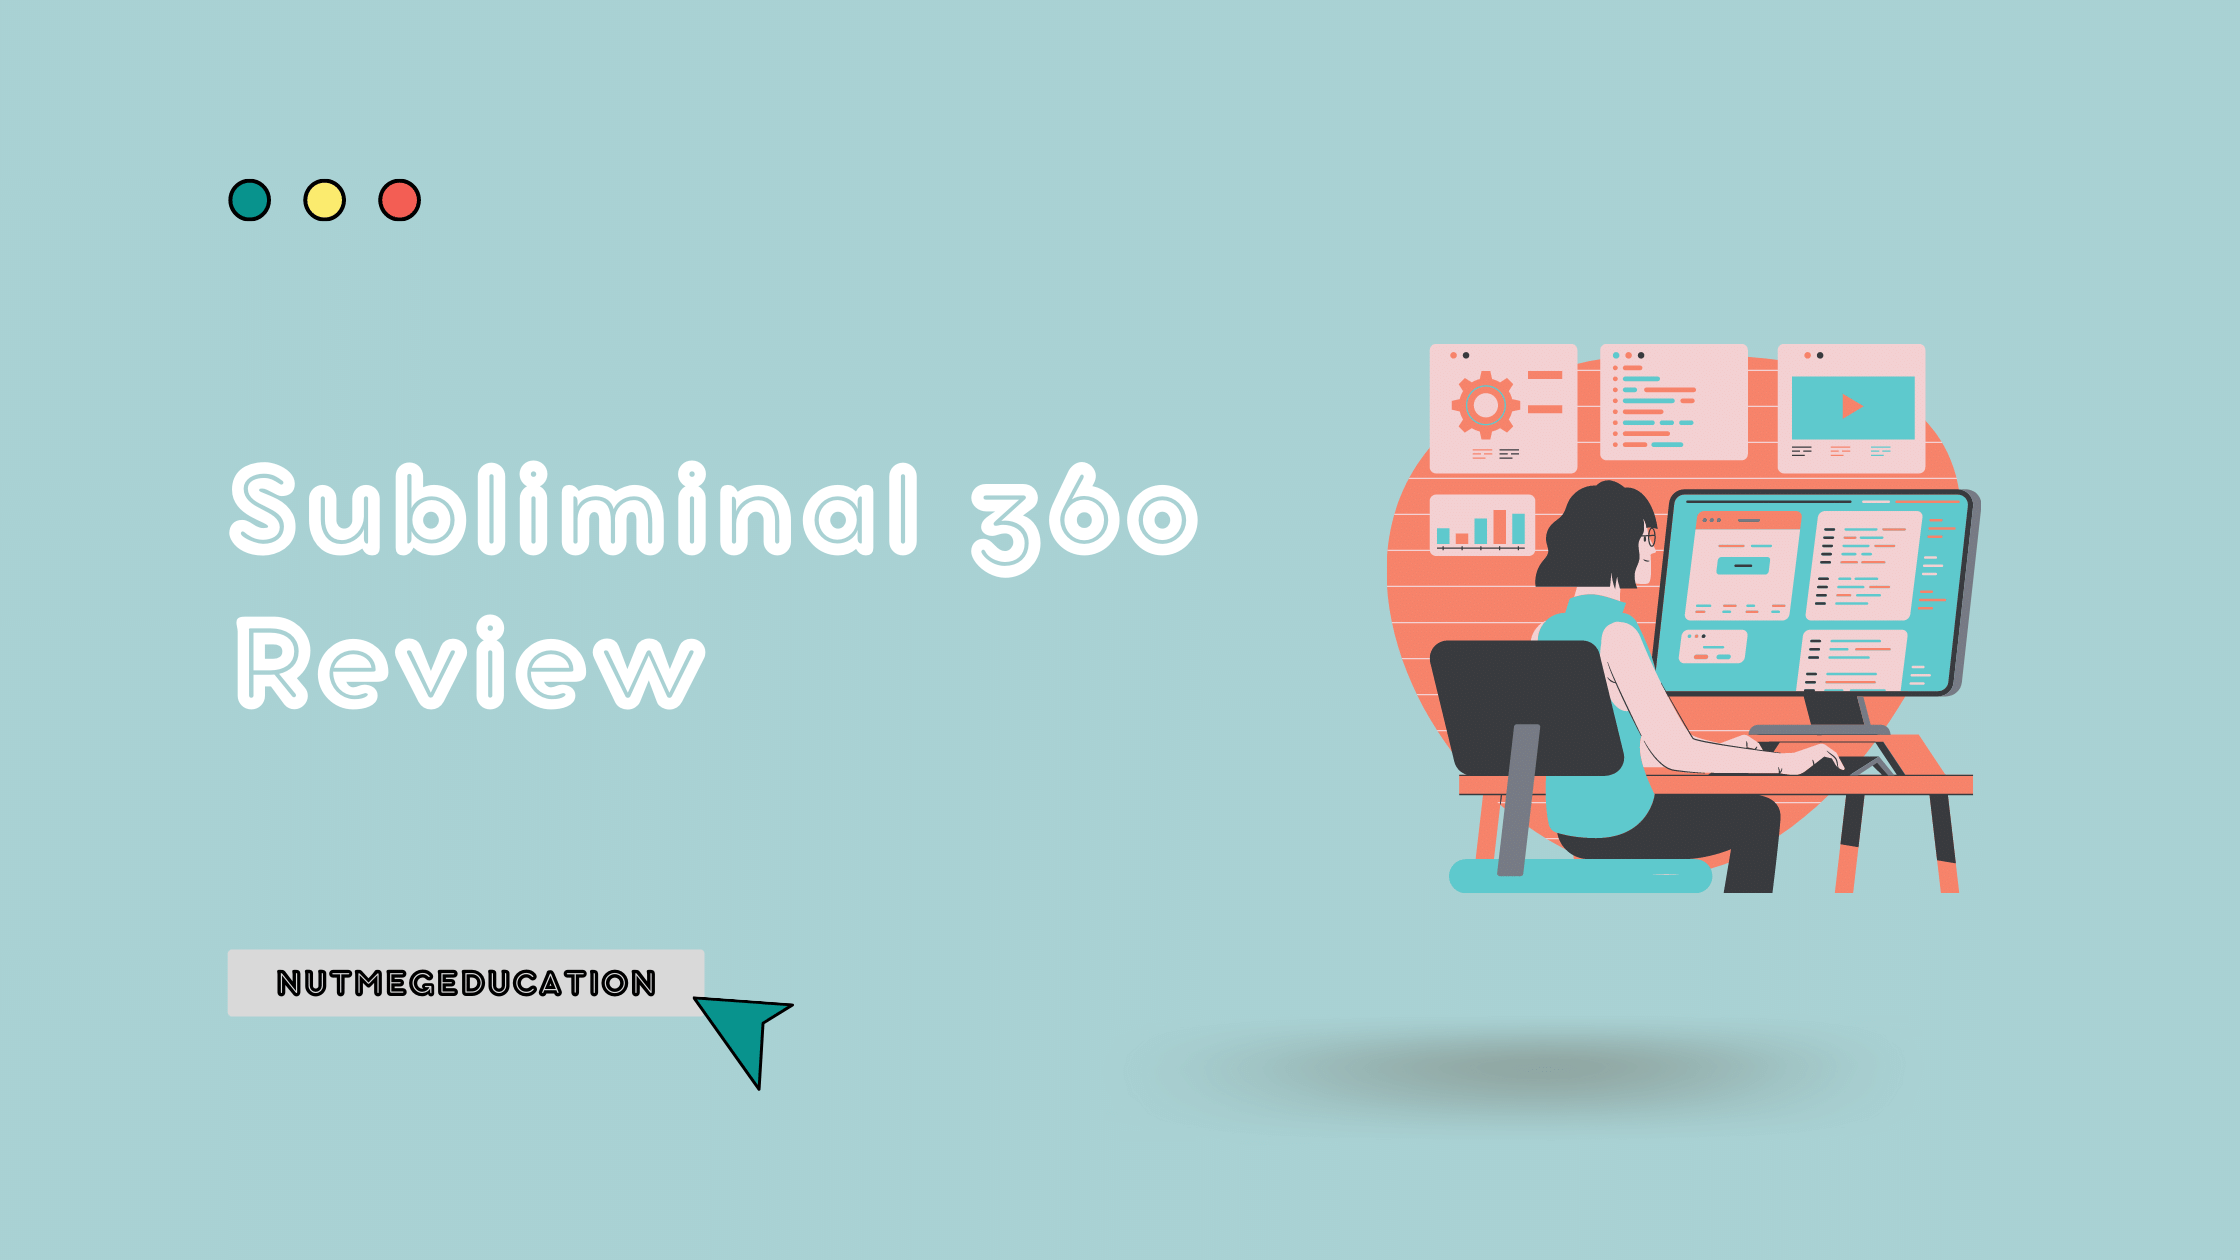 Subliminal 360 Review- NutMegEducation